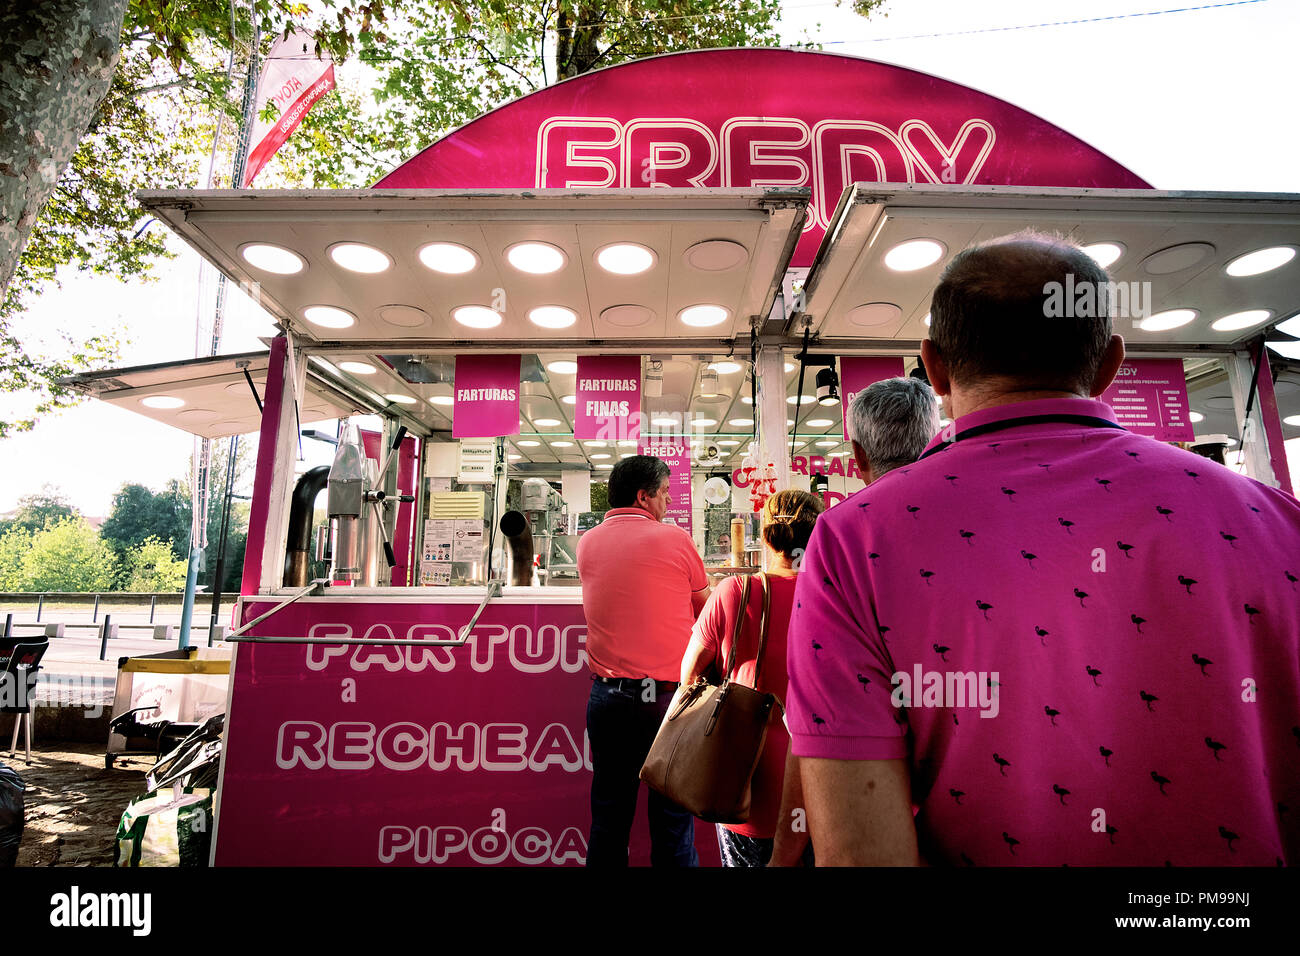 people line up for street food on a pink food trailer, in the line a guy with pink shirt Stock Photo